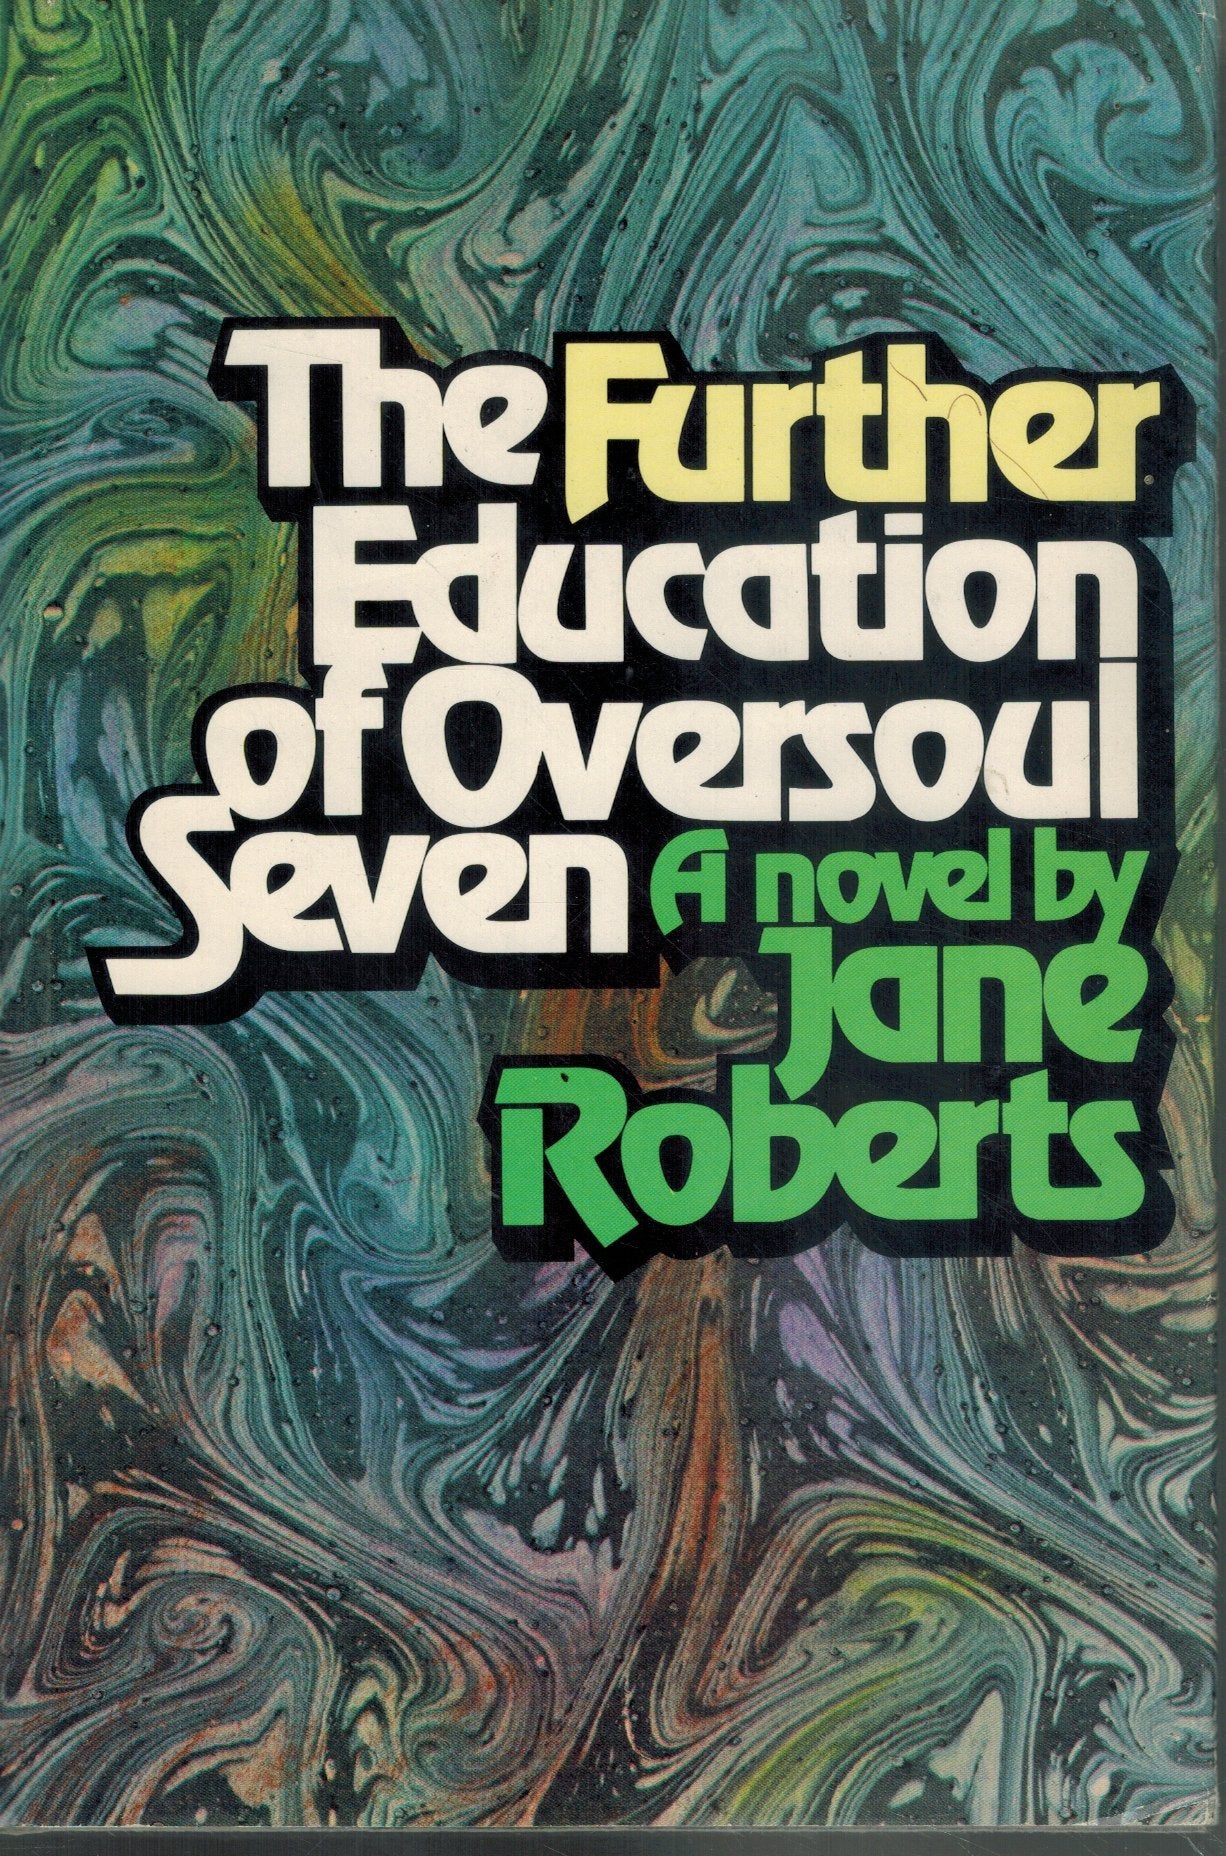 THE FURTHER EDUCATION OF OVERSOUL SEVEN  by Roberts, Jane